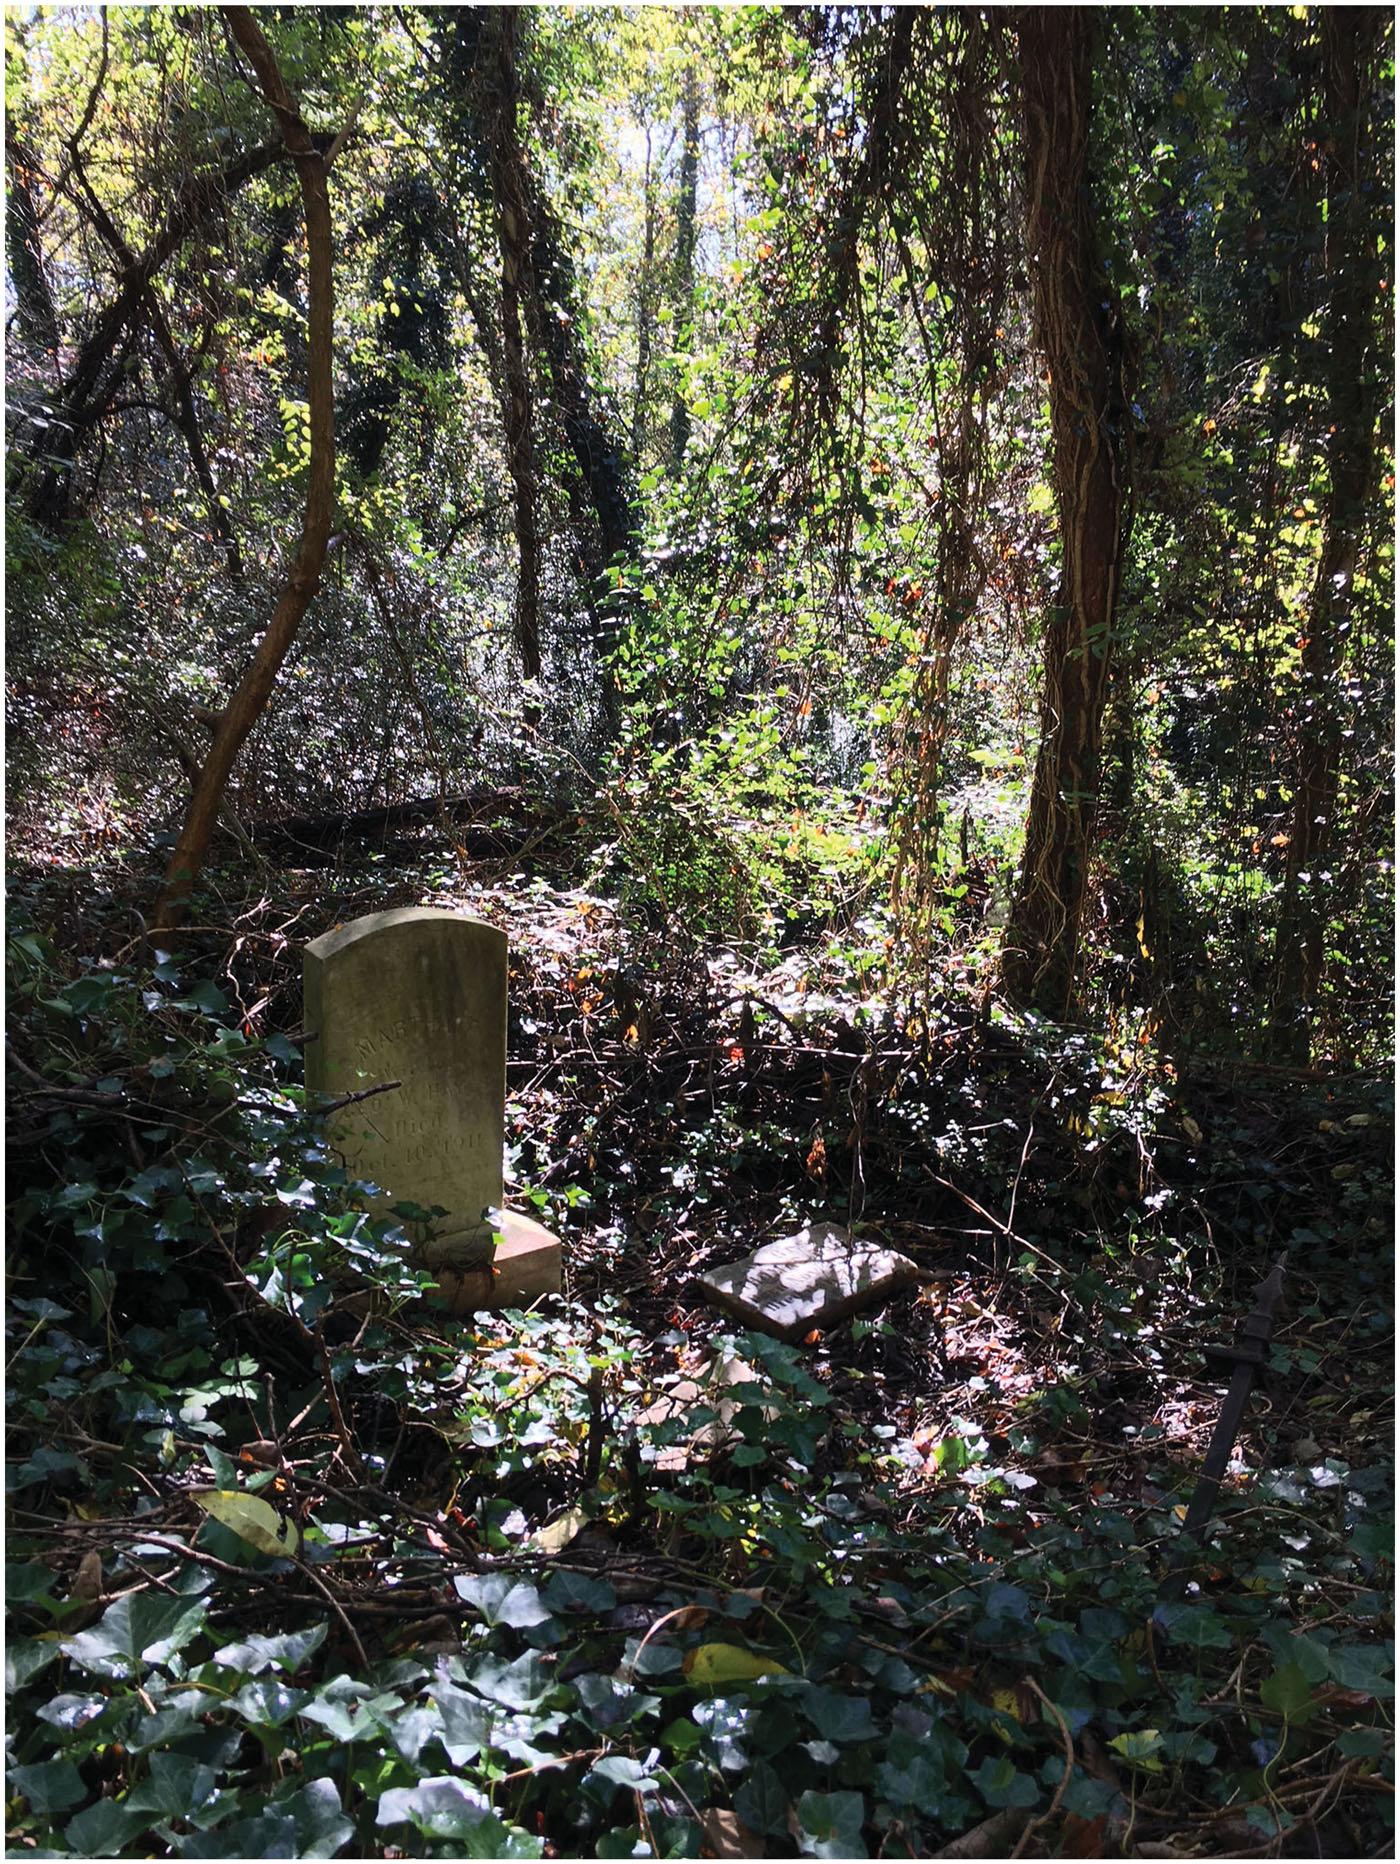 Cemetery in a forest